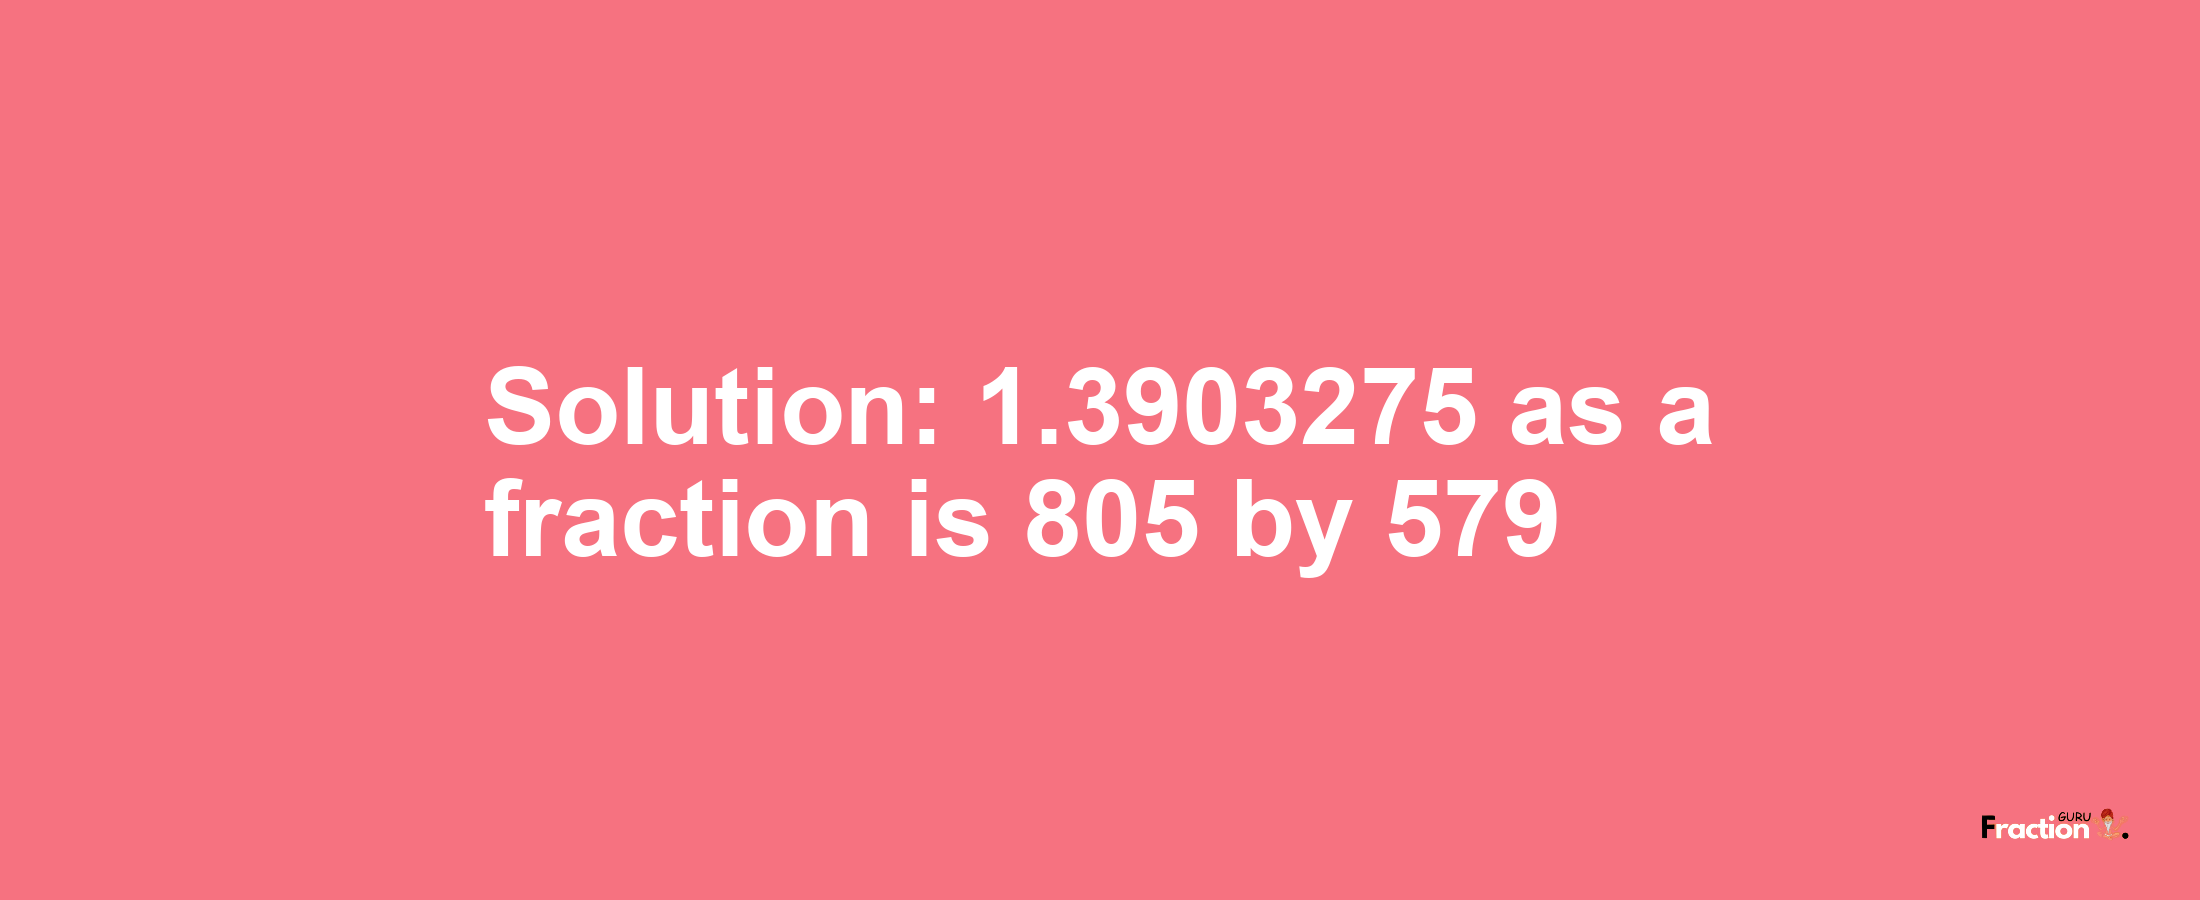 Solution:1.3903275 as a fraction is 805/579